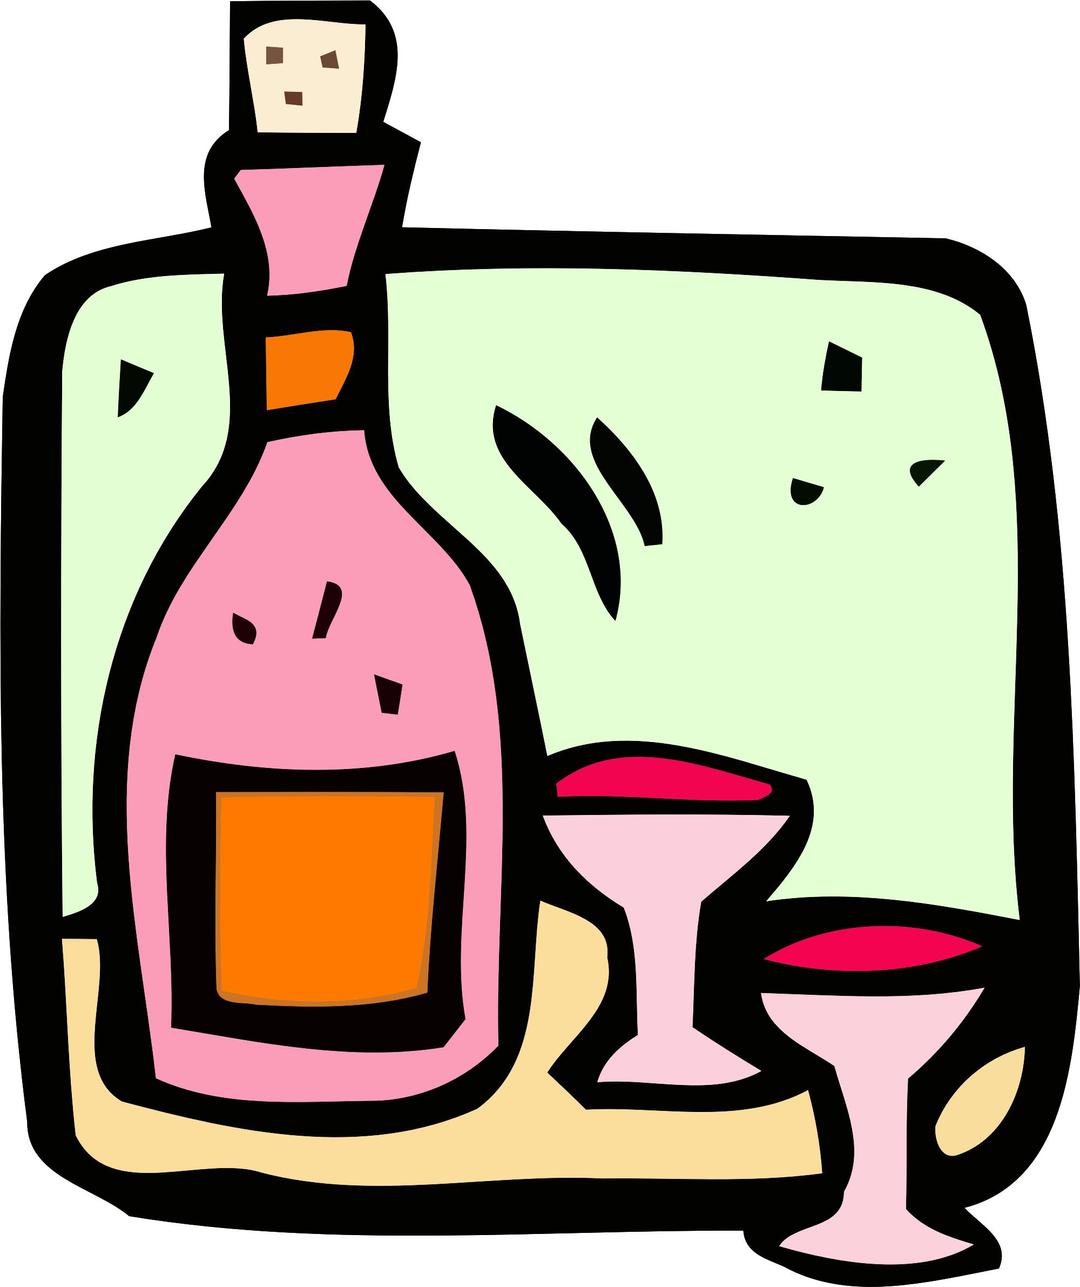 Food and drink icon - wine png transparent